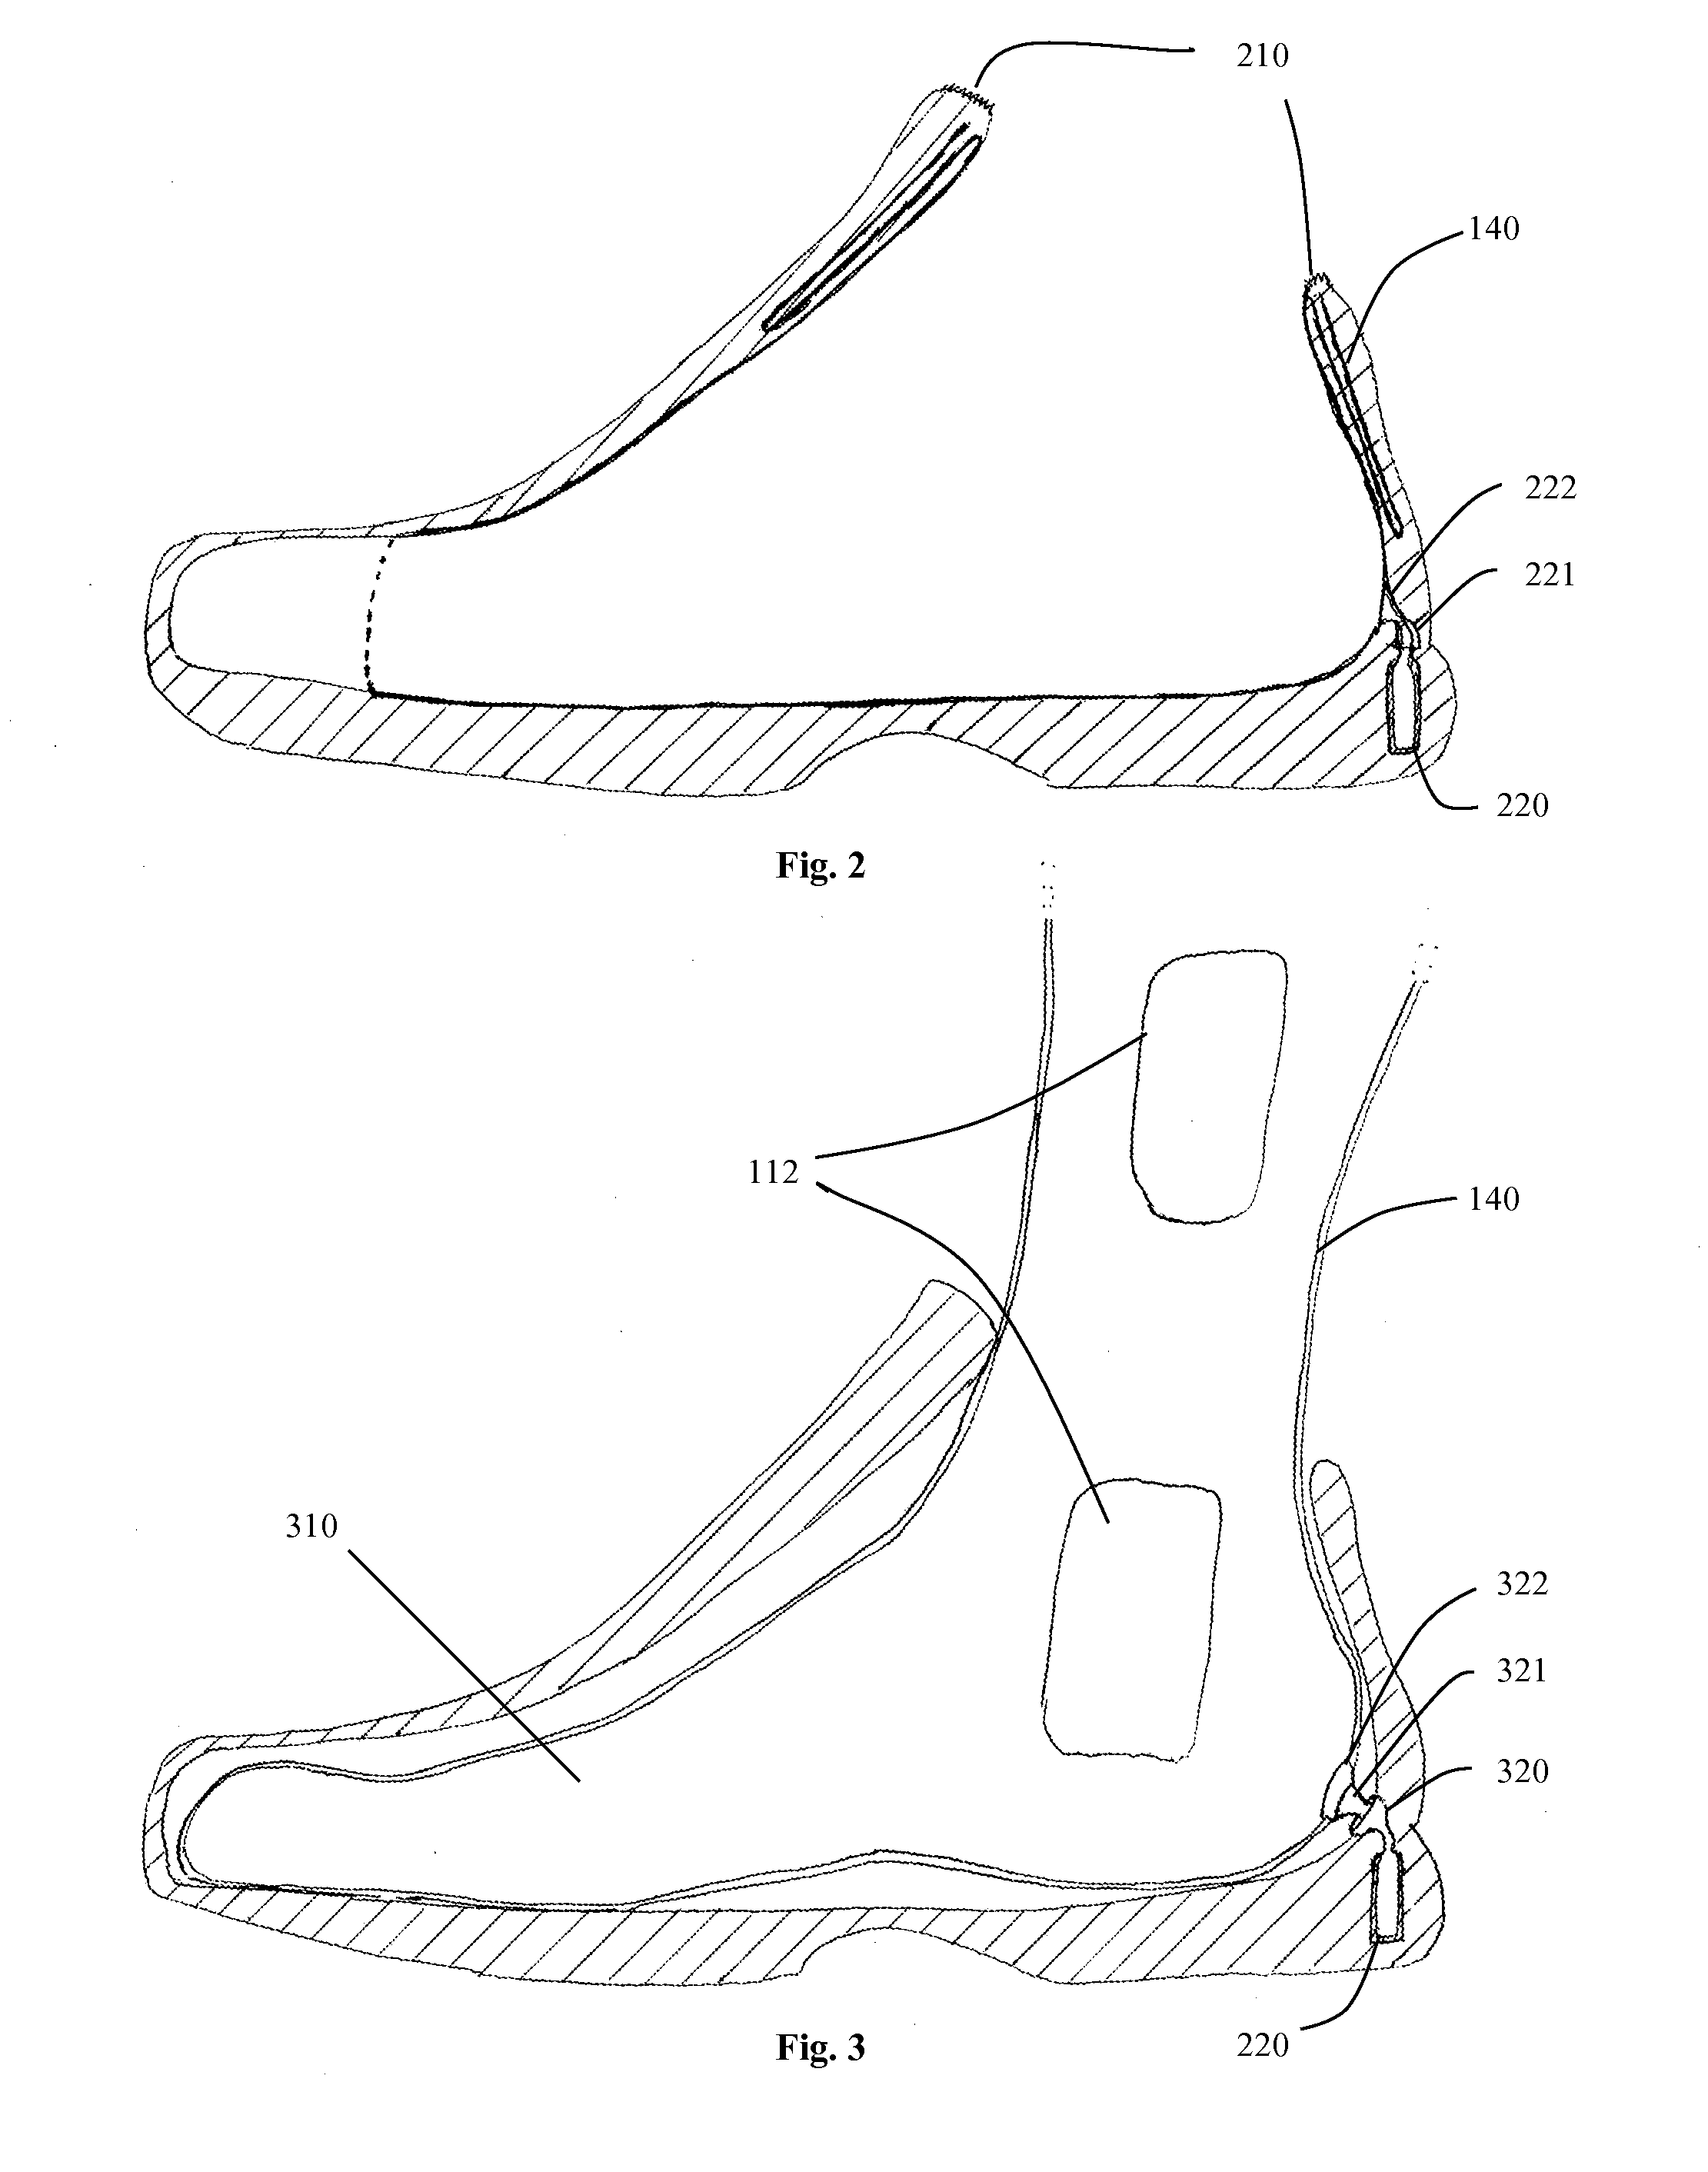 Ankle airbag device and method for preventing sprain injuries